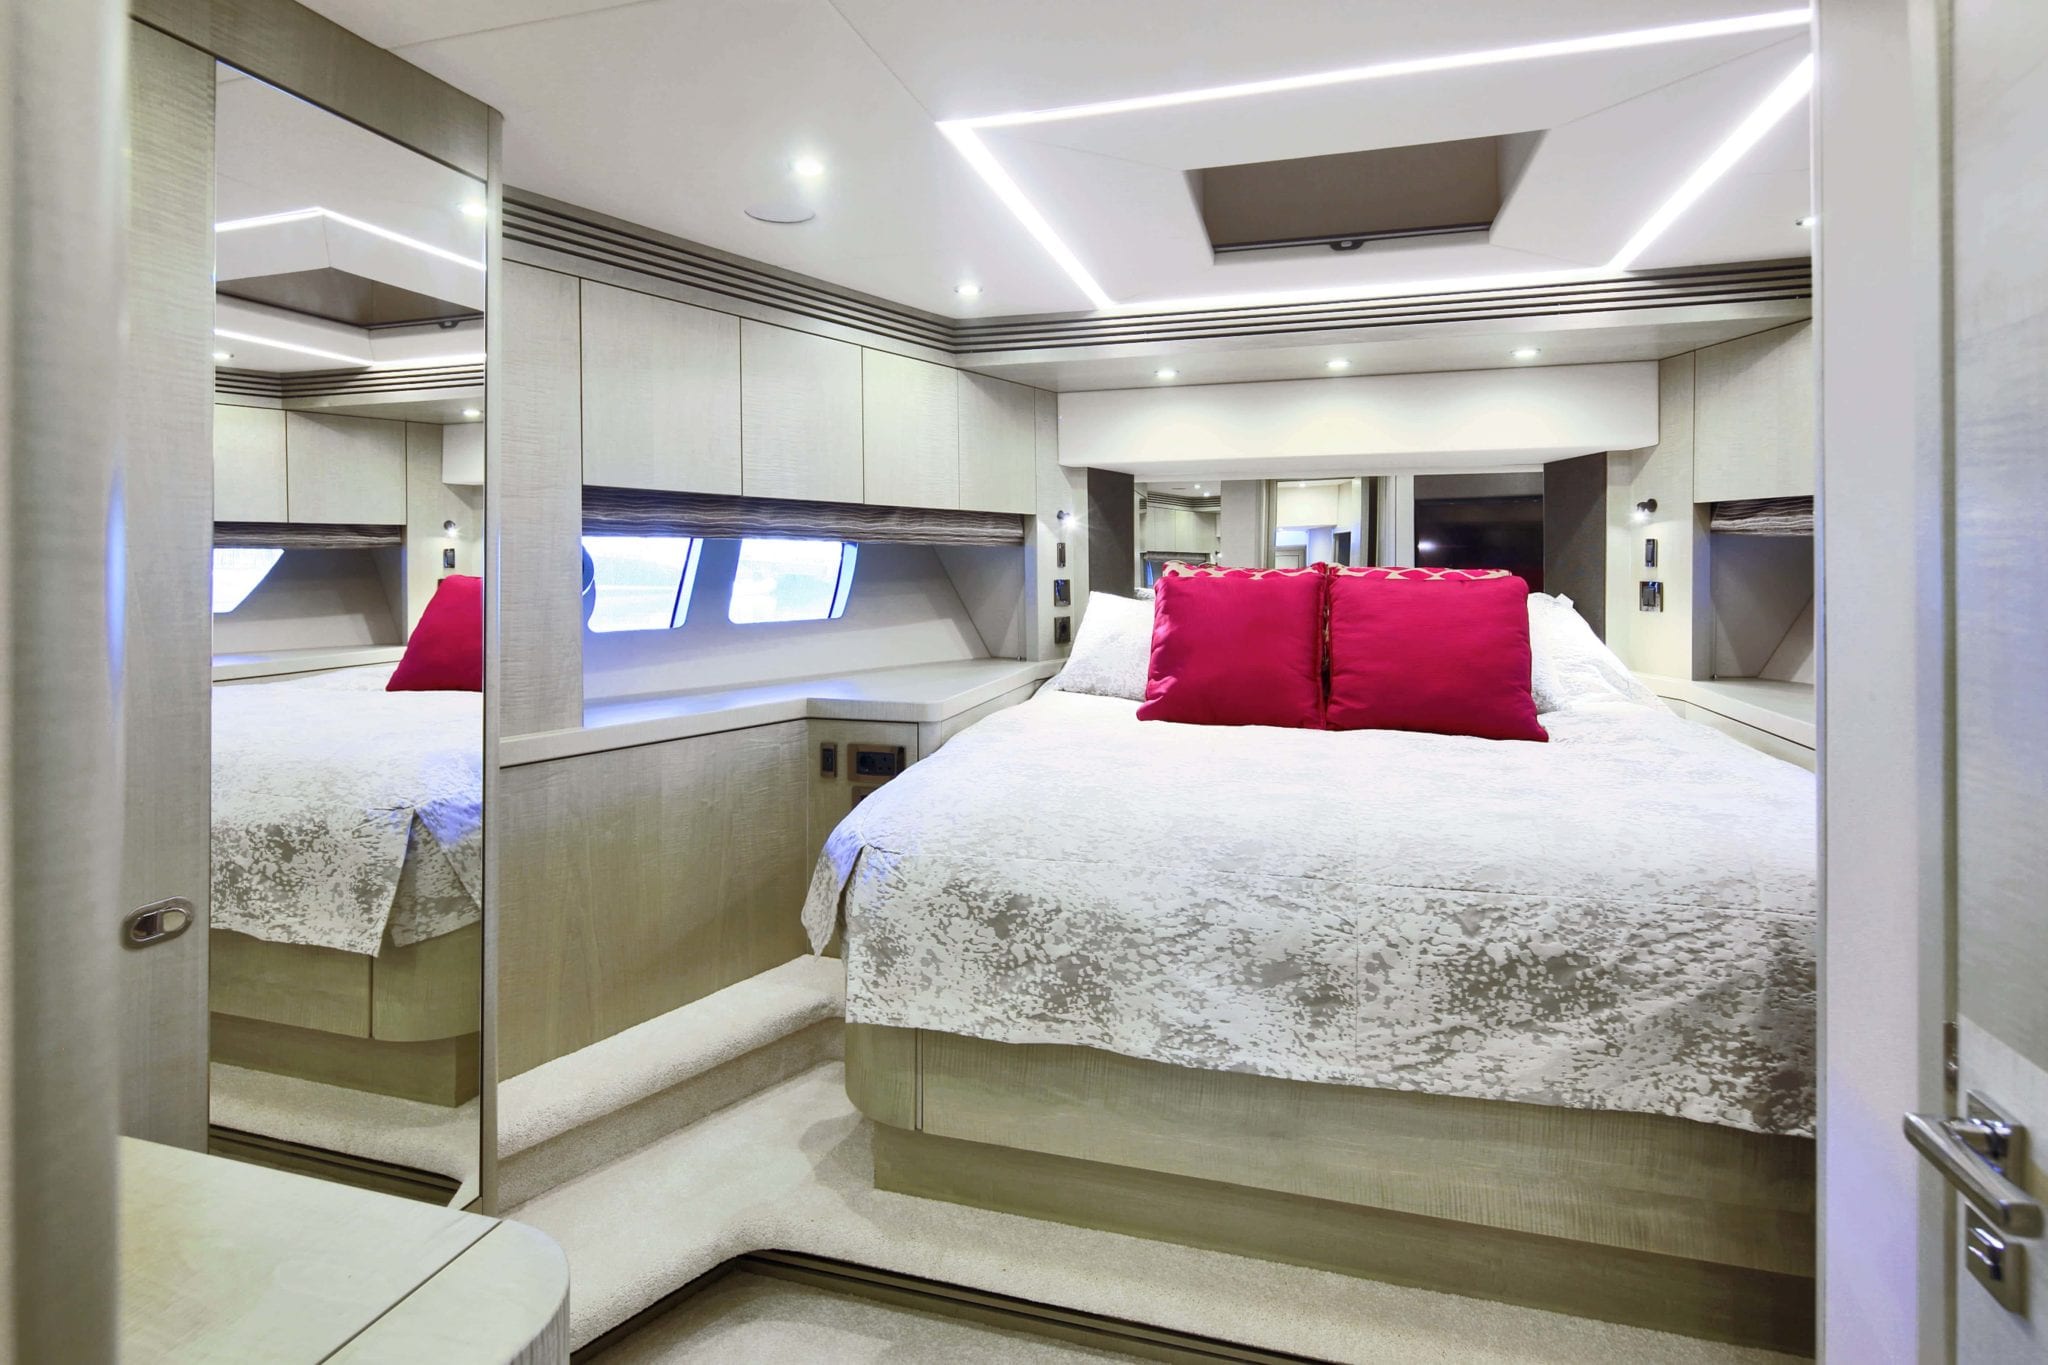 One of our rooms onboard the luxury sunseeker yacht.